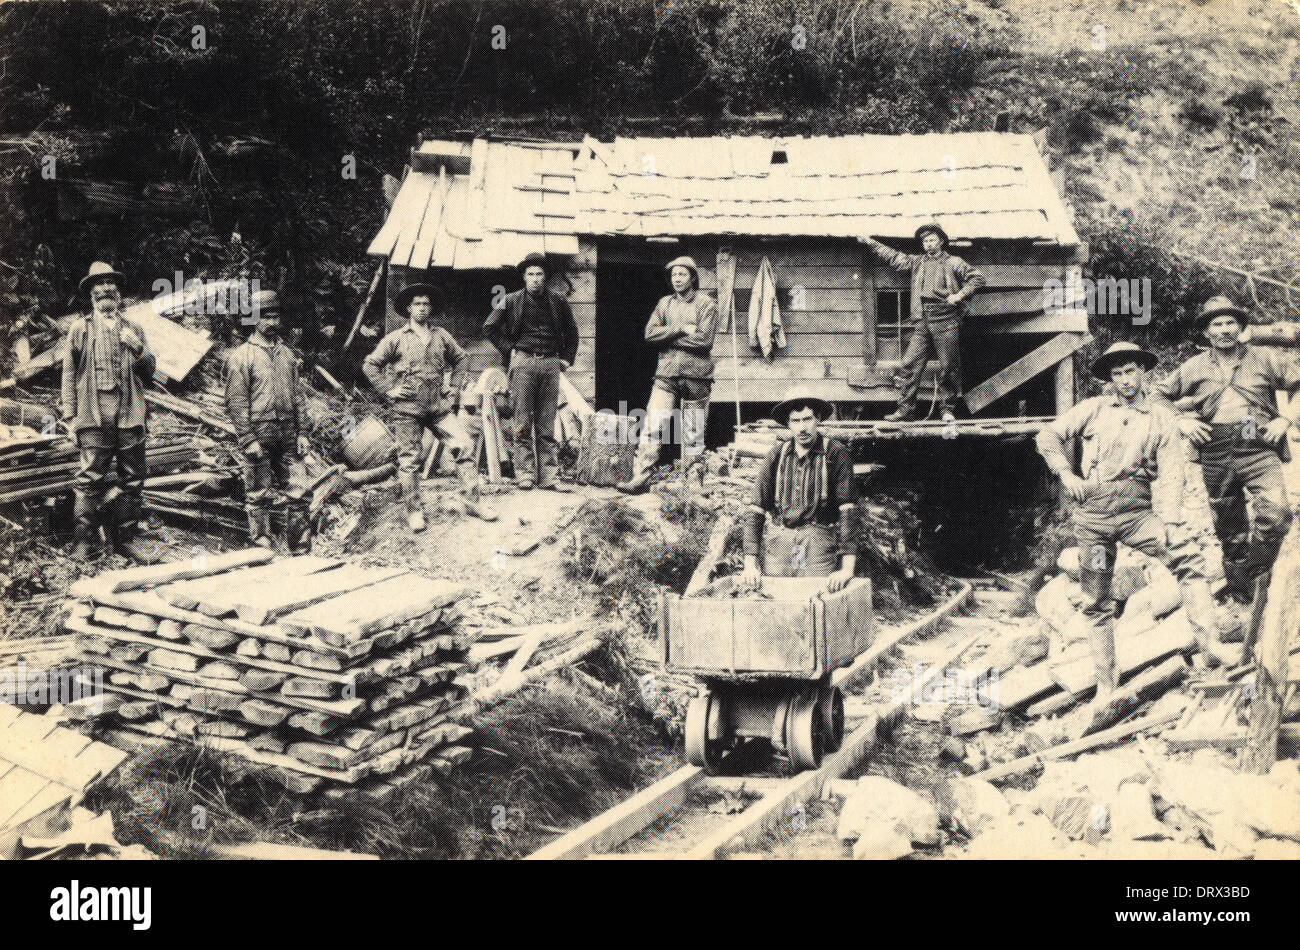 Where to Find Gold in California – Western Mining History